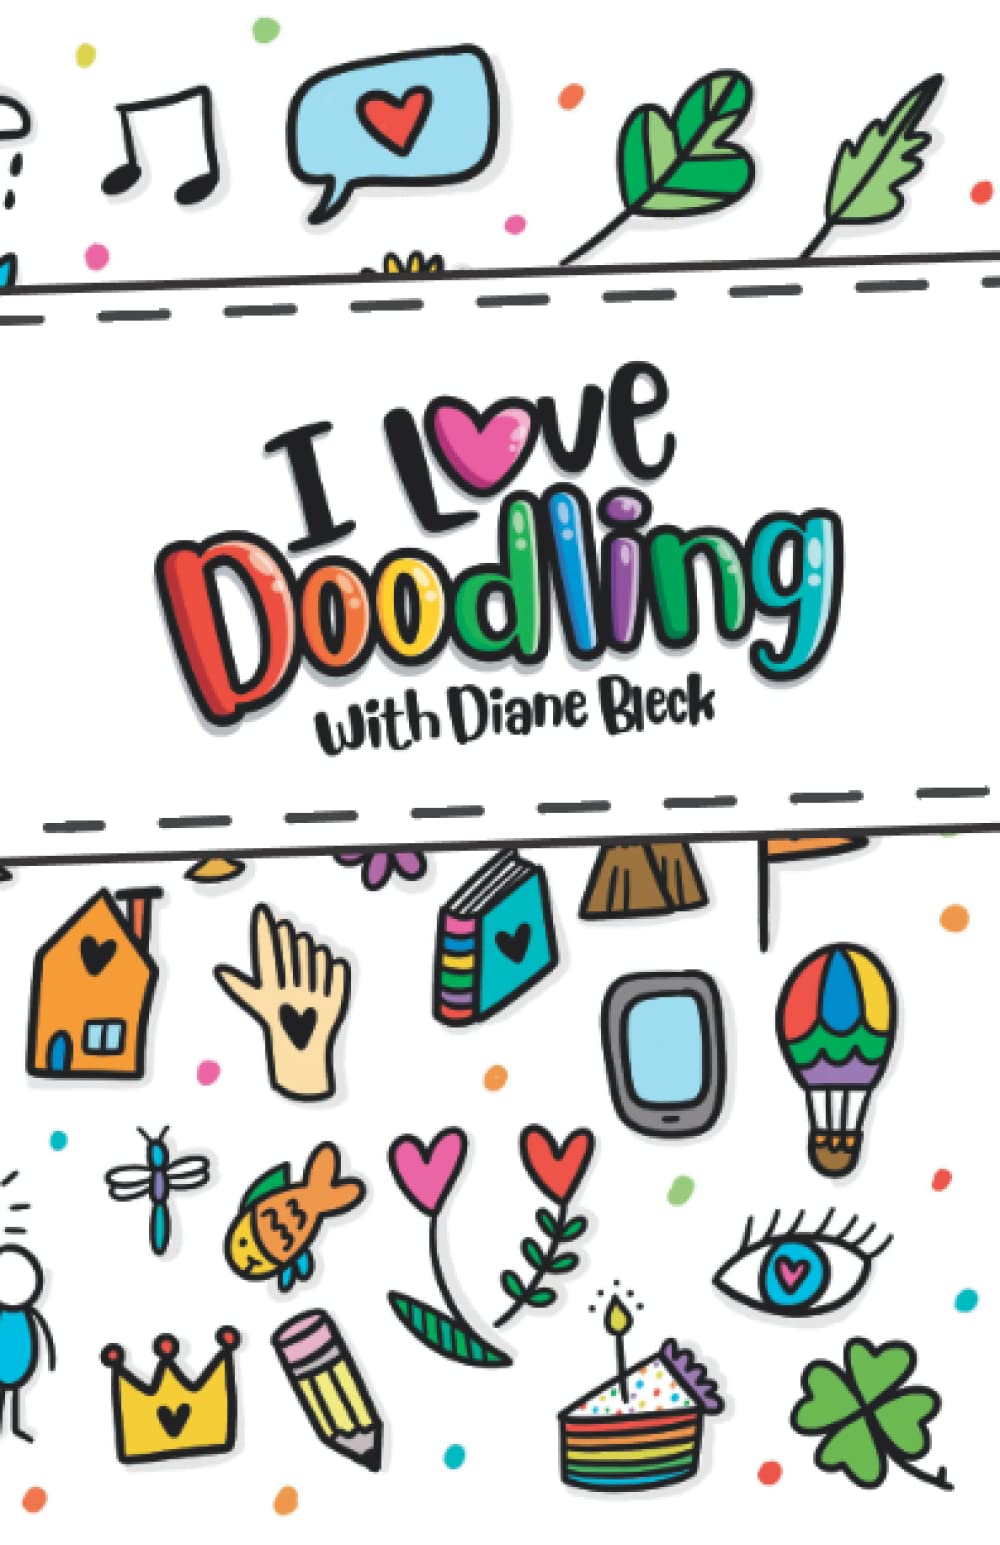 Diane Bleck Publishes Doodling Book as #1 New Release on Amazon